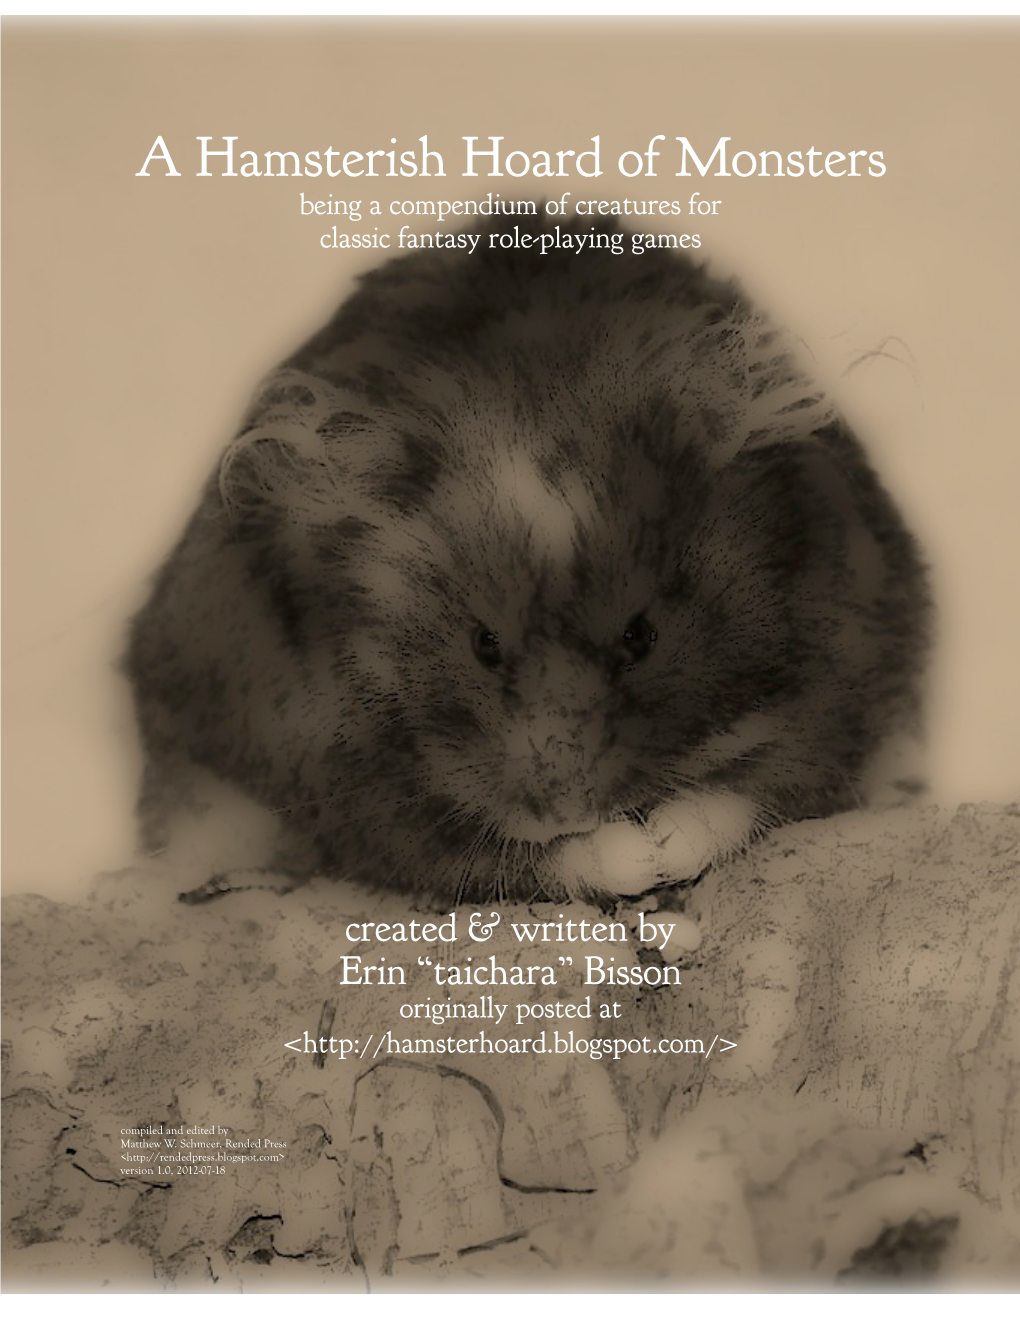 A Hamsterish Hoard of Monsters Being a Compendium of Creatures for Classic Fantasy Role-Playing Games